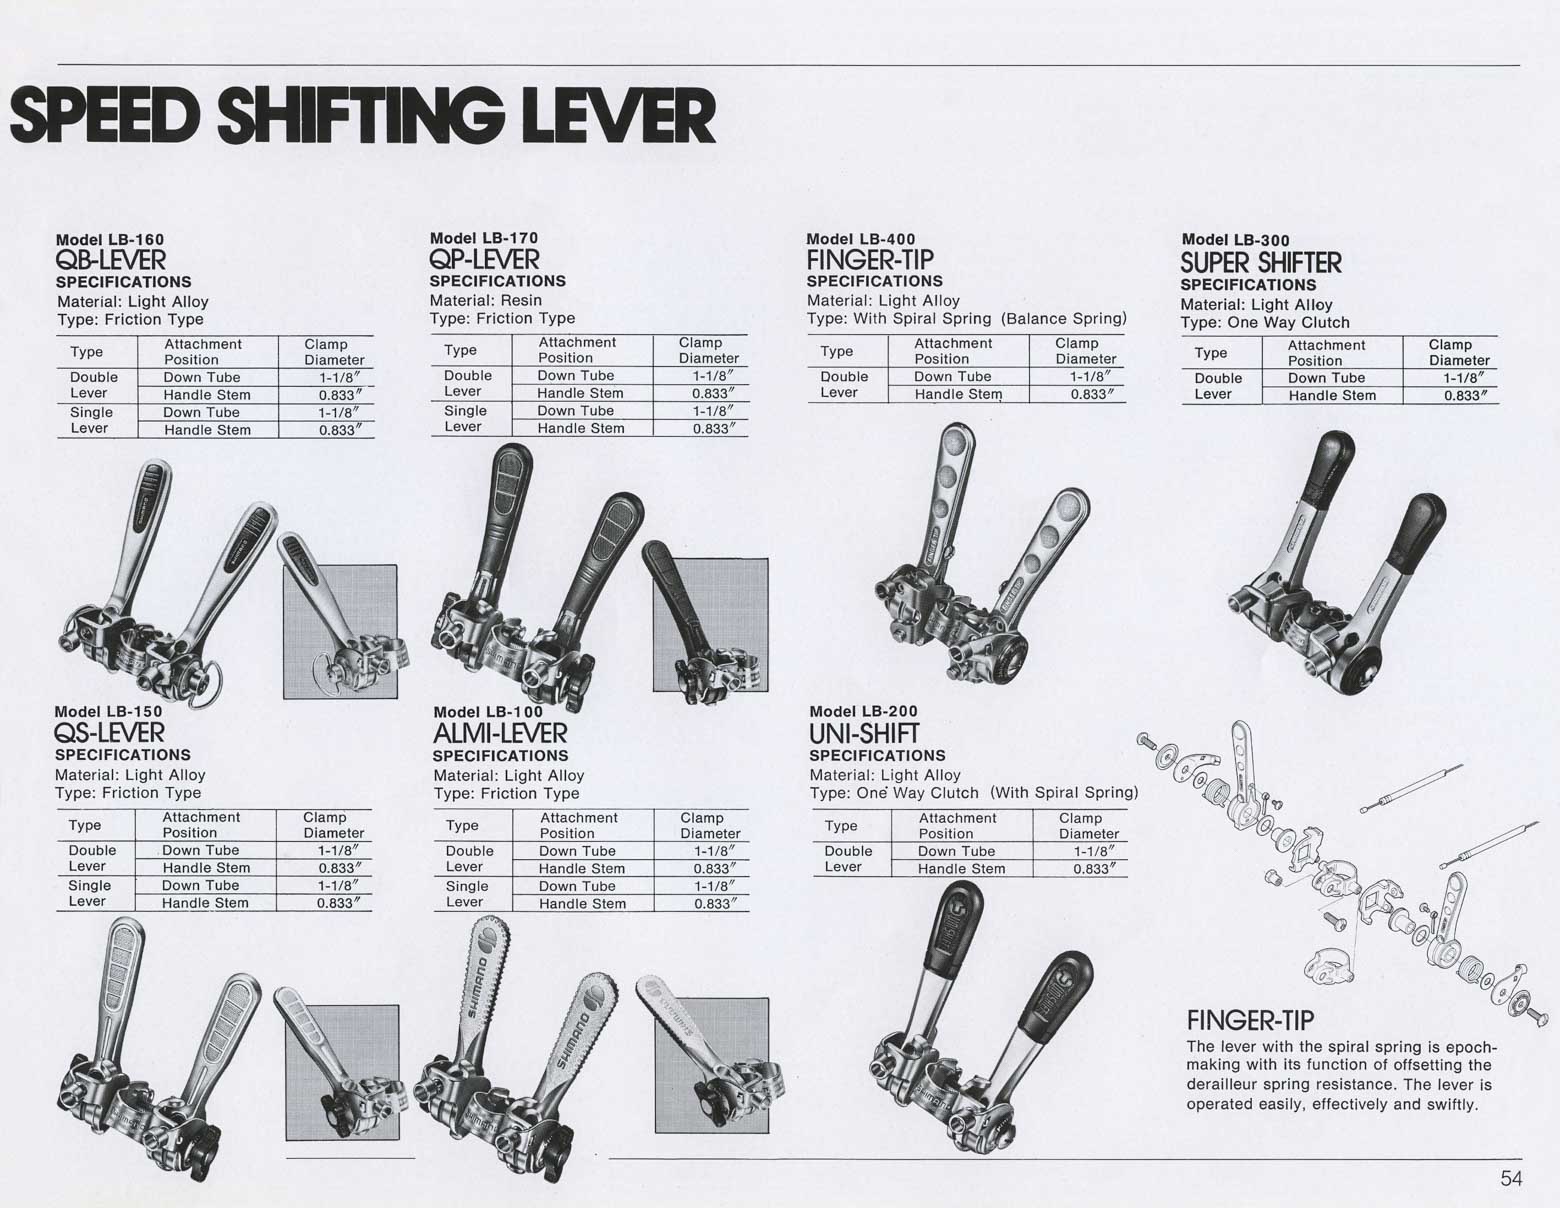 Shimano Bicycle System Components (December 1978) page 54 main image